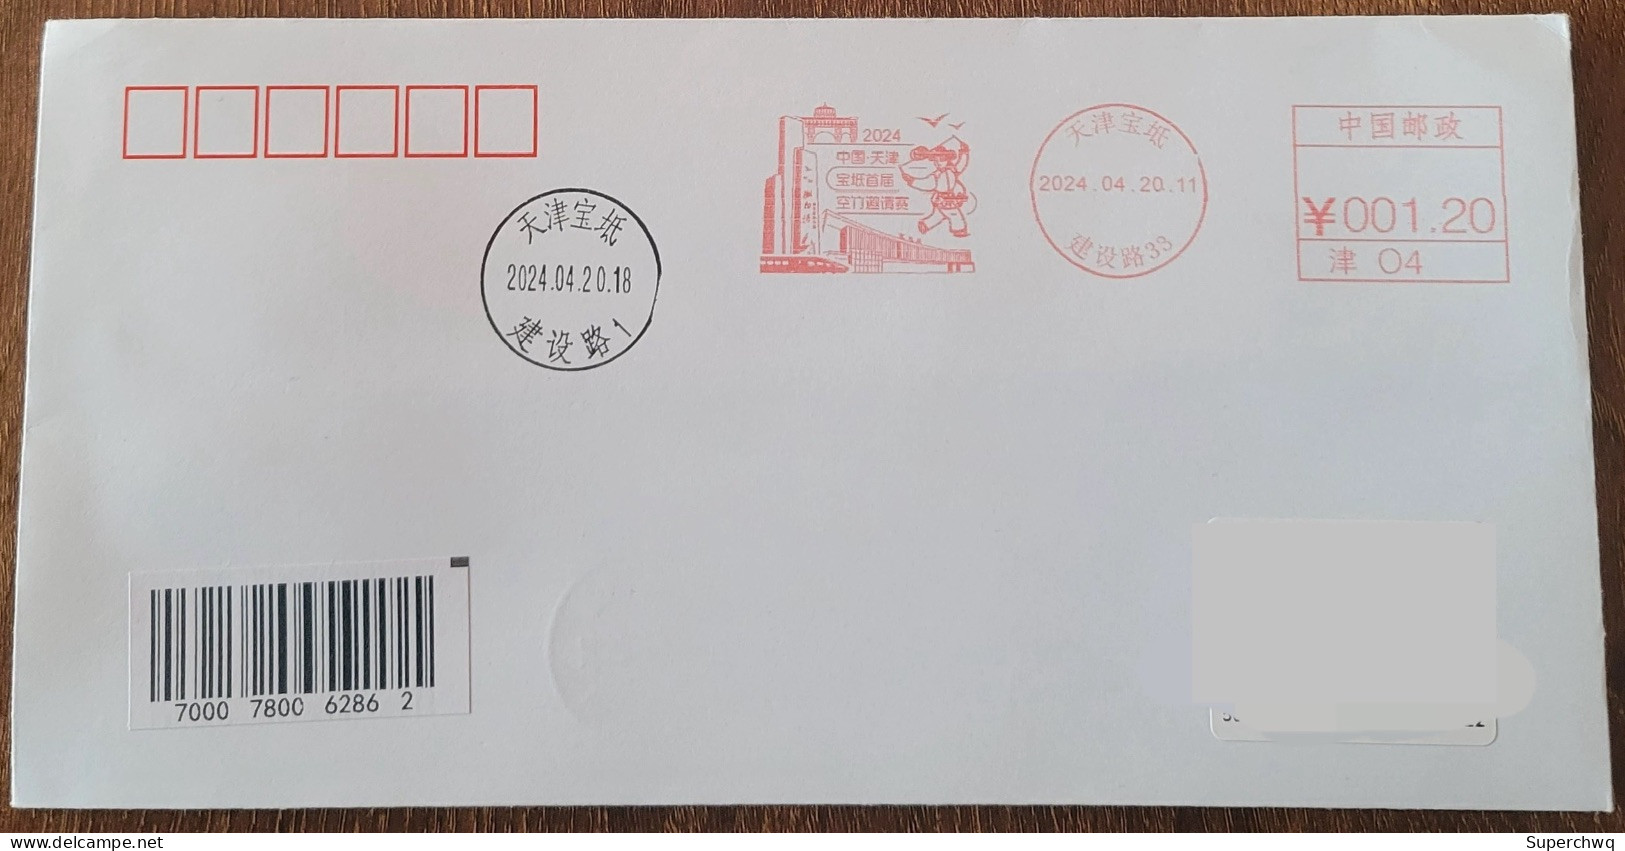 China Cover The First Tianjin Baodi Diabolo Invitational (Tianjin) Was Stamped With Postage On The First Day Of Actual D - Postcards